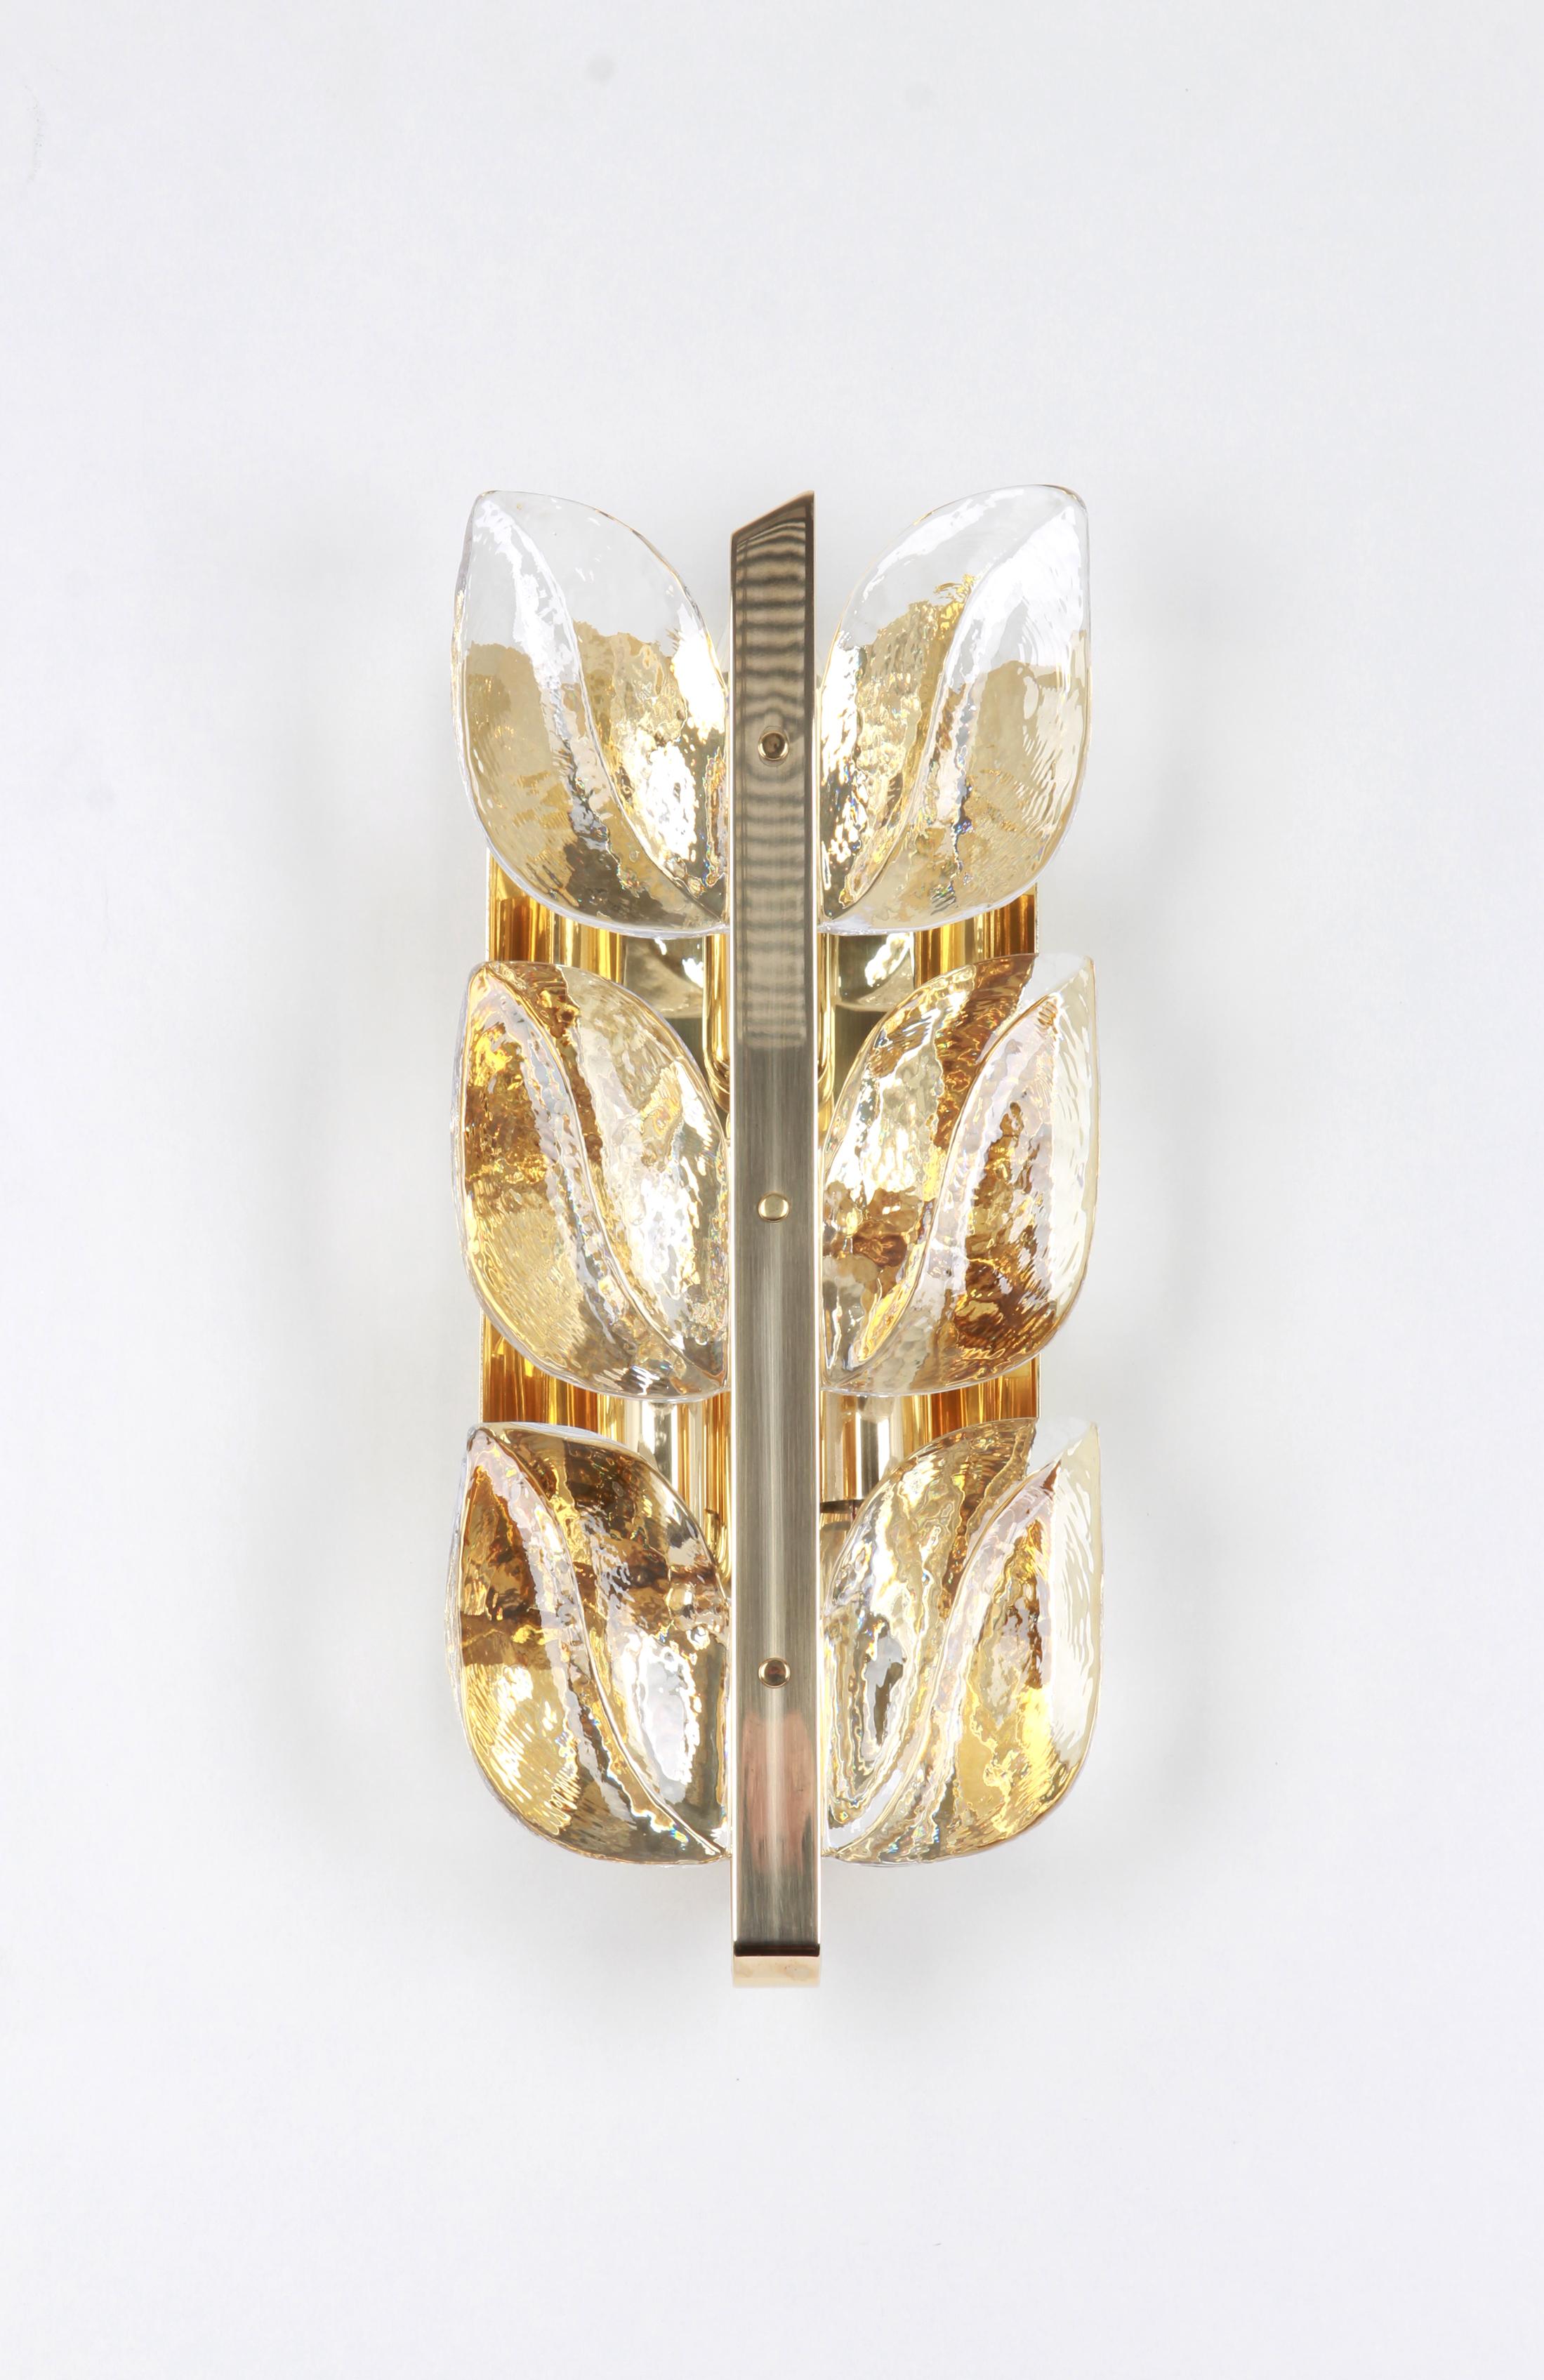 Wonderful midcentury wall sconces with six Murano glass pieces on a brass frame, made by Kalmar, Austria, manufactured, circa 1960-1969.
The sconce needs three E14 small bulbs and they are also compatible with the U.S. Standards
Serie: